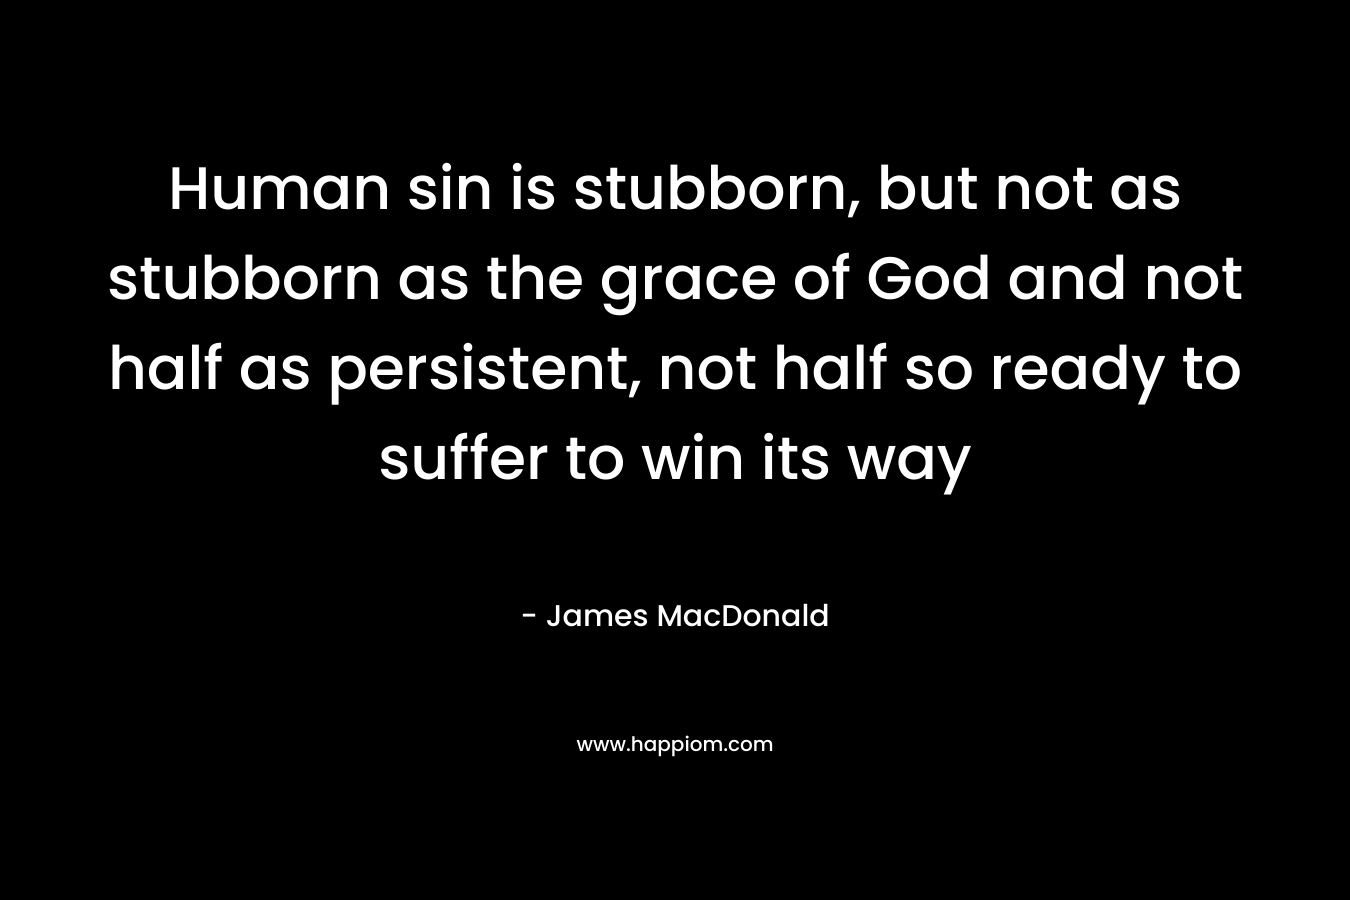 Human sin is stubborn, but not as stubborn as the grace of God and not half as persistent, not half so ready to suffer to win its way – James MacDonald